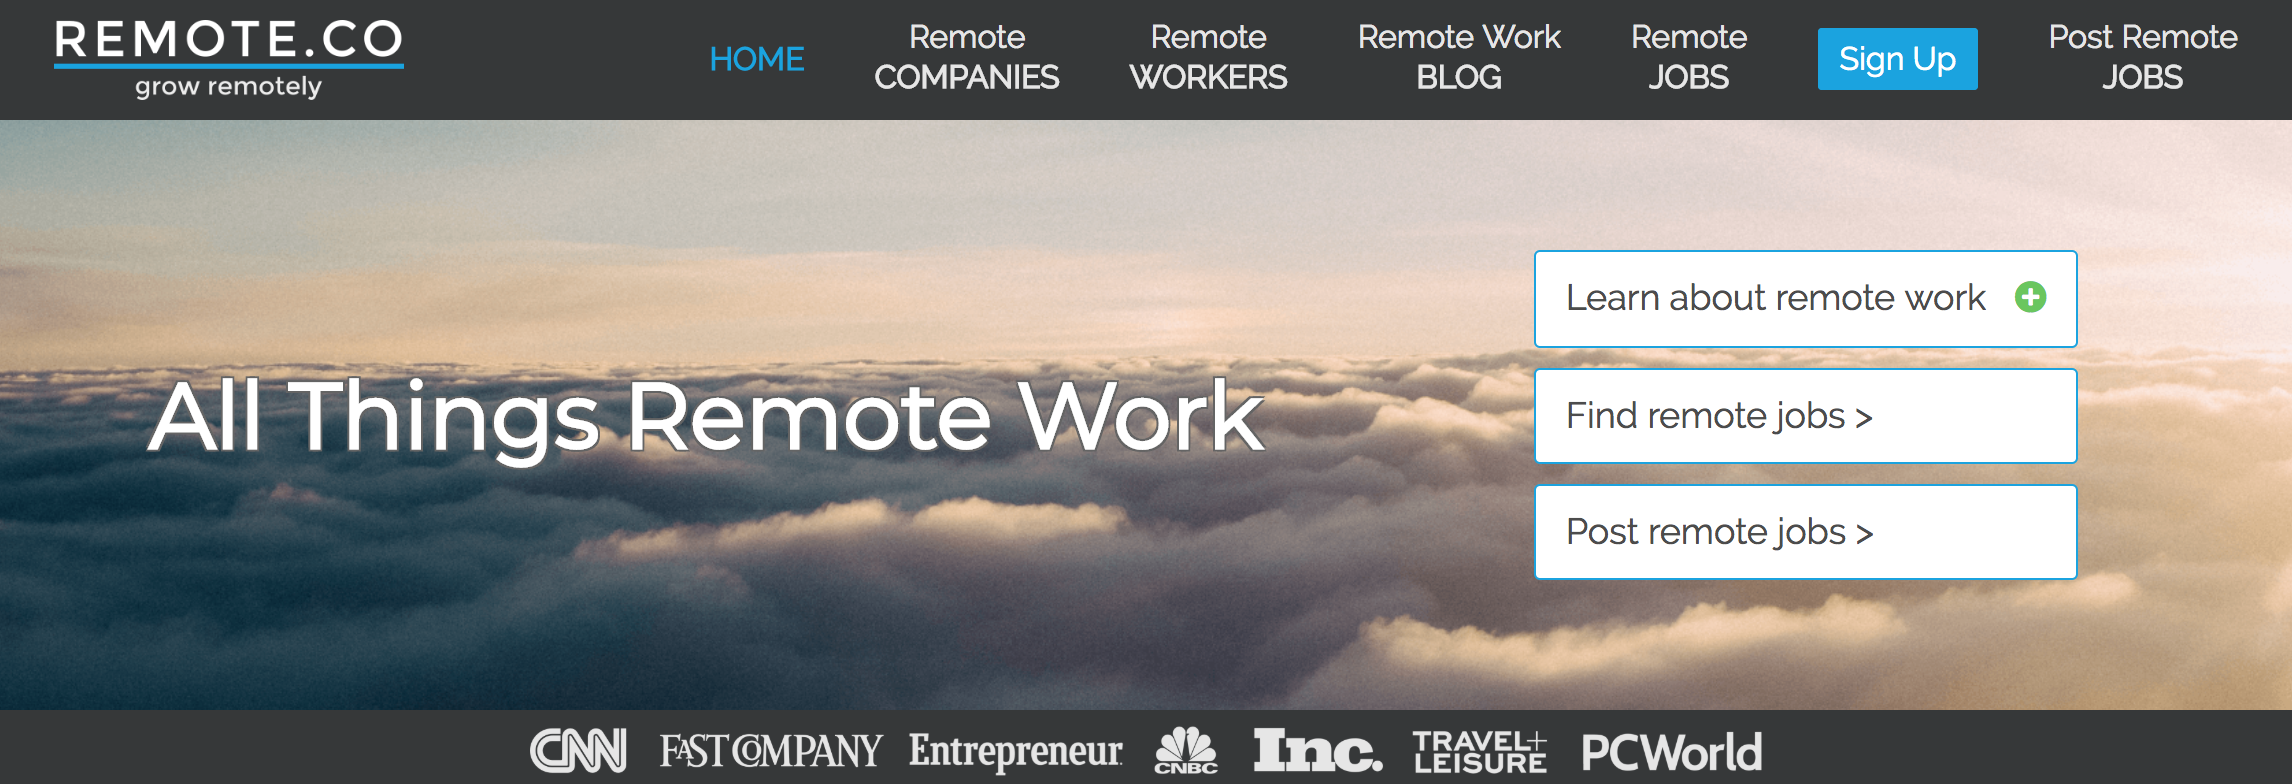 How to find remote work, how to find remote jobs, remote work job board, how to find telecommute jobs